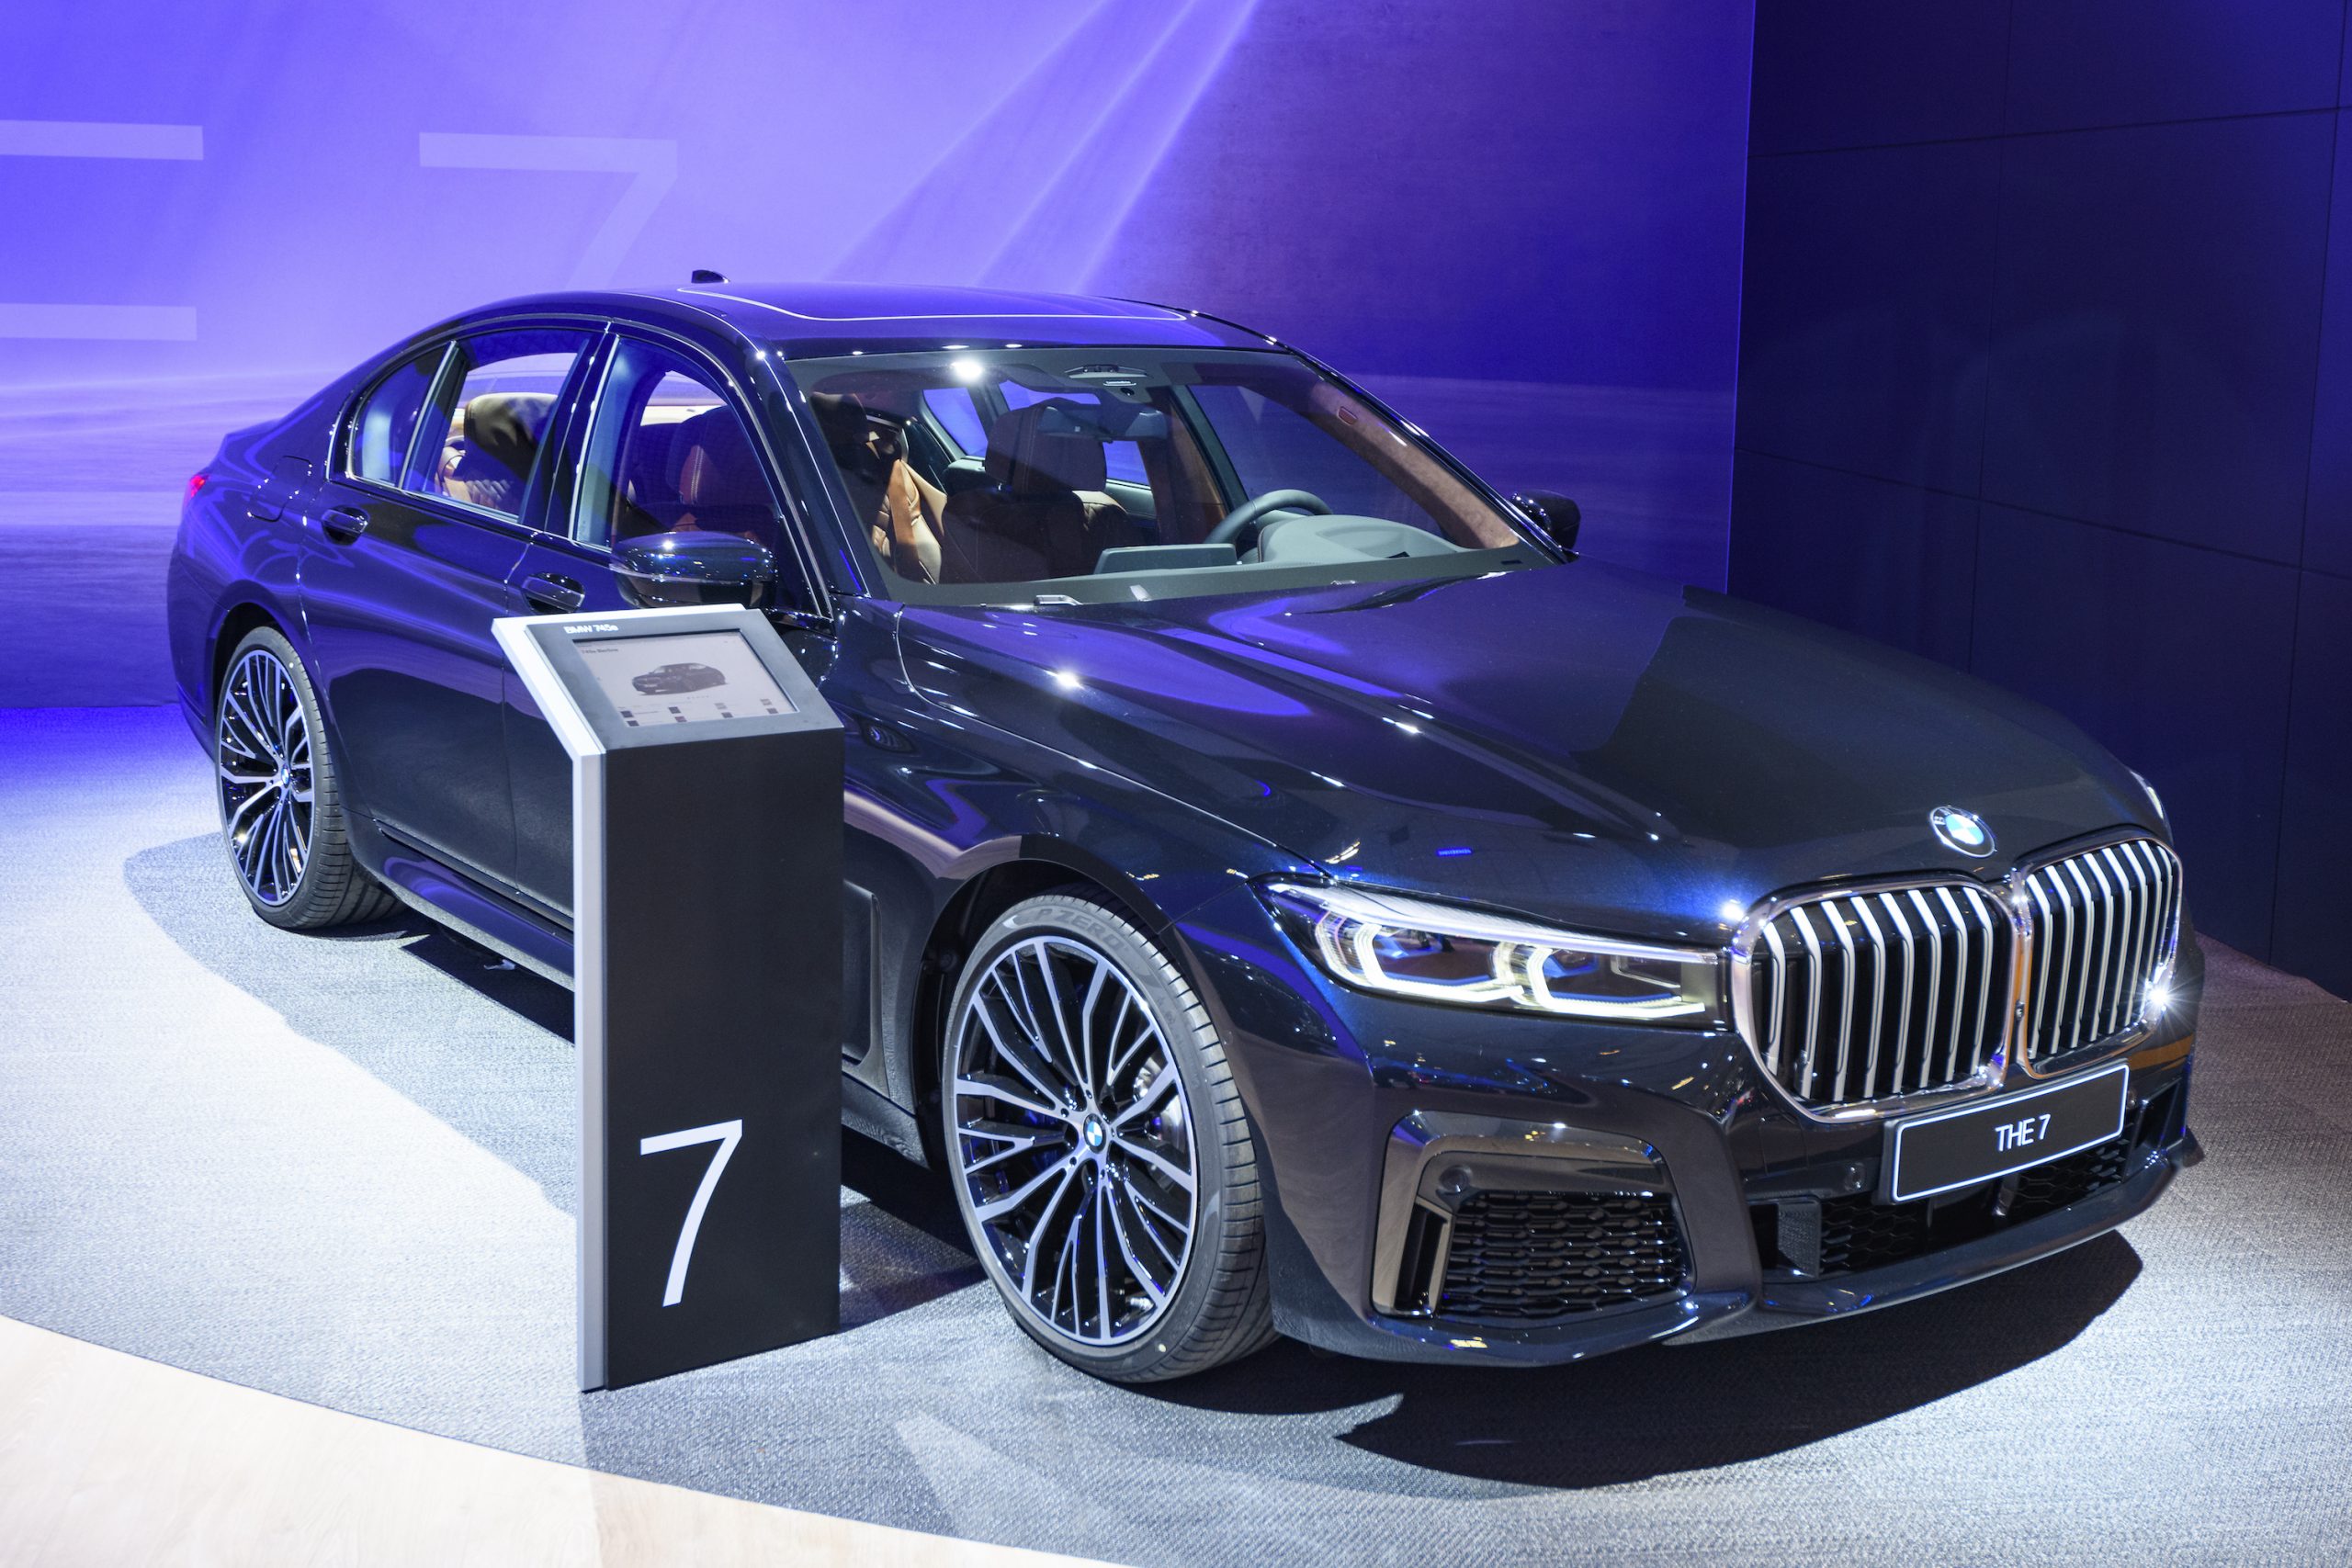 The 2021 BMW 7 Series Is the Roomiest Sedan to Buy This Year, Says U.S